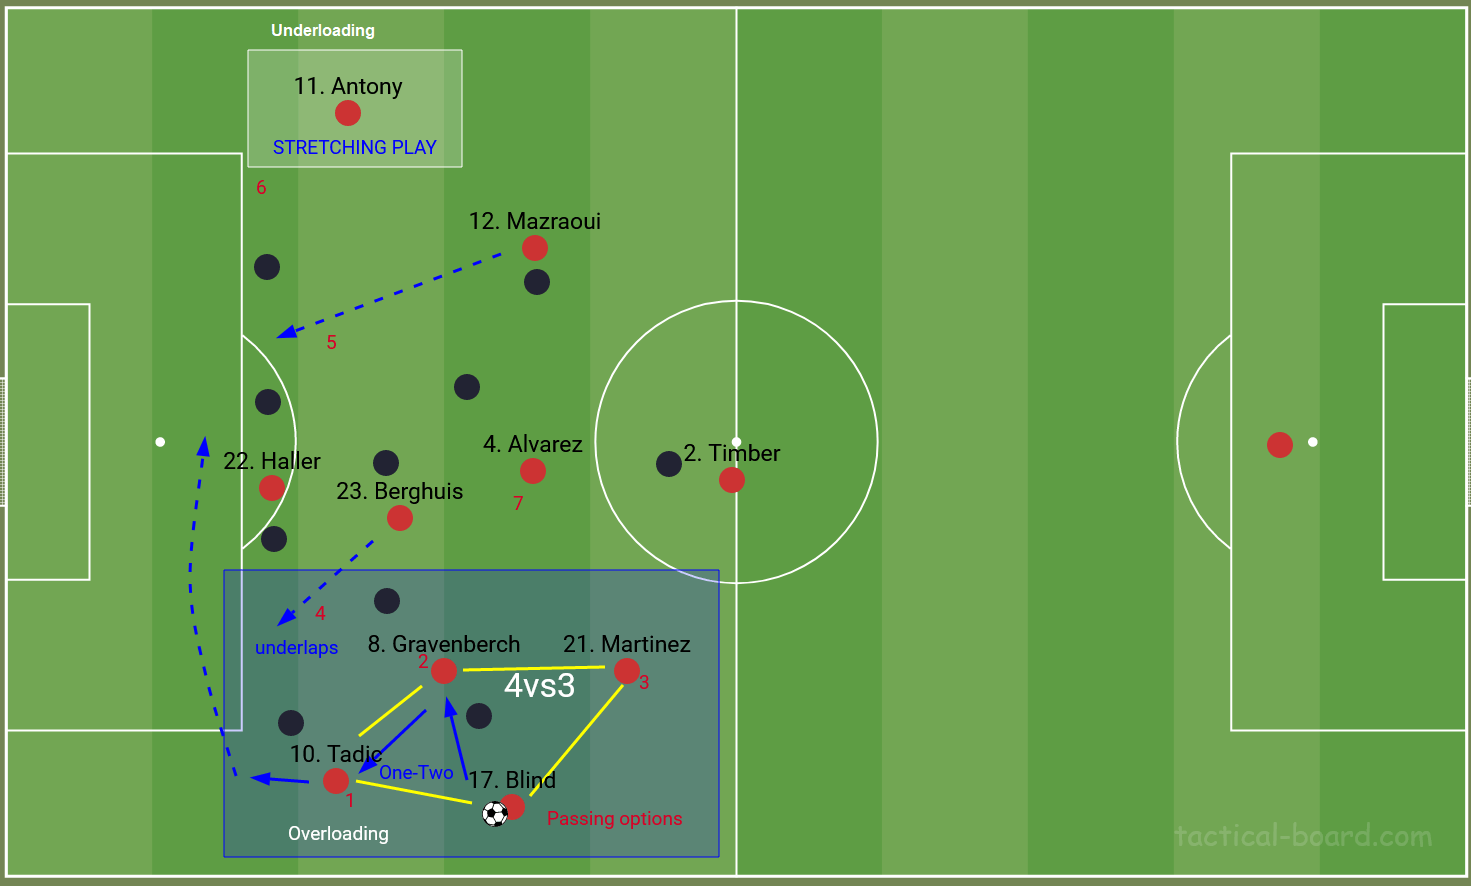 How Ajax Overloads and underloads the flanks